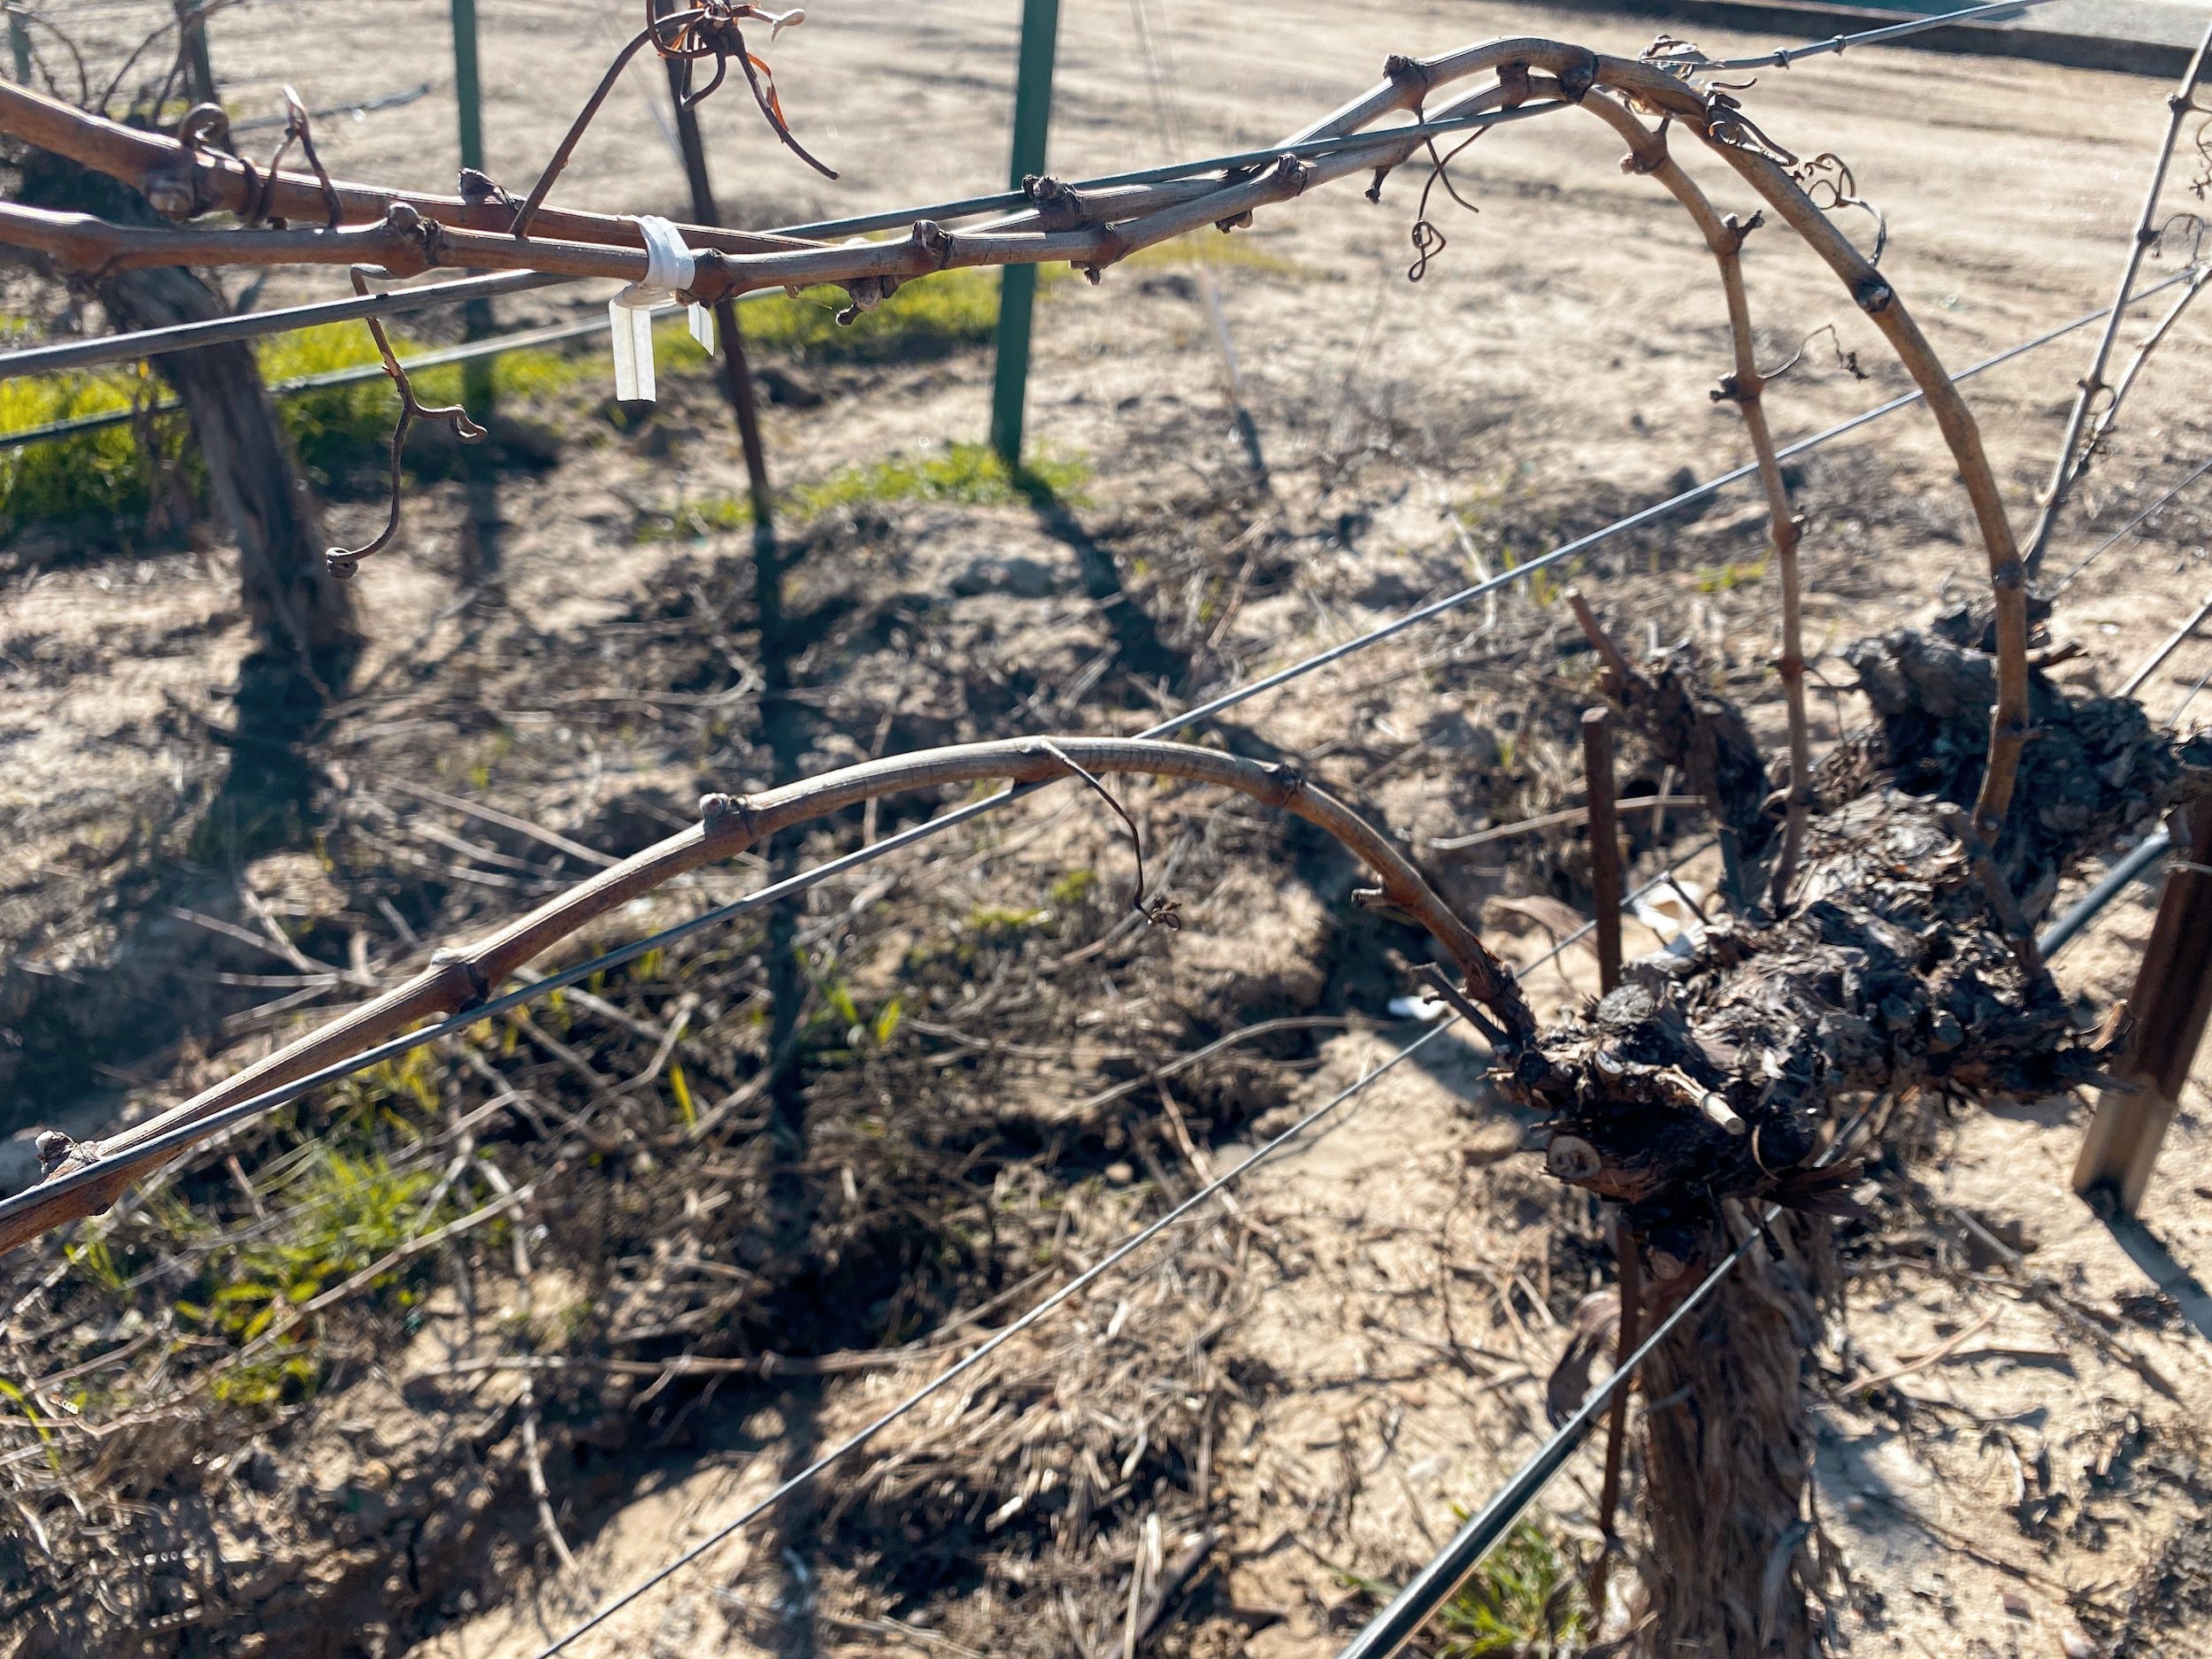 Tied spurs of a grape vine at Cass Winery in Paso Robles, California showing winter pruning